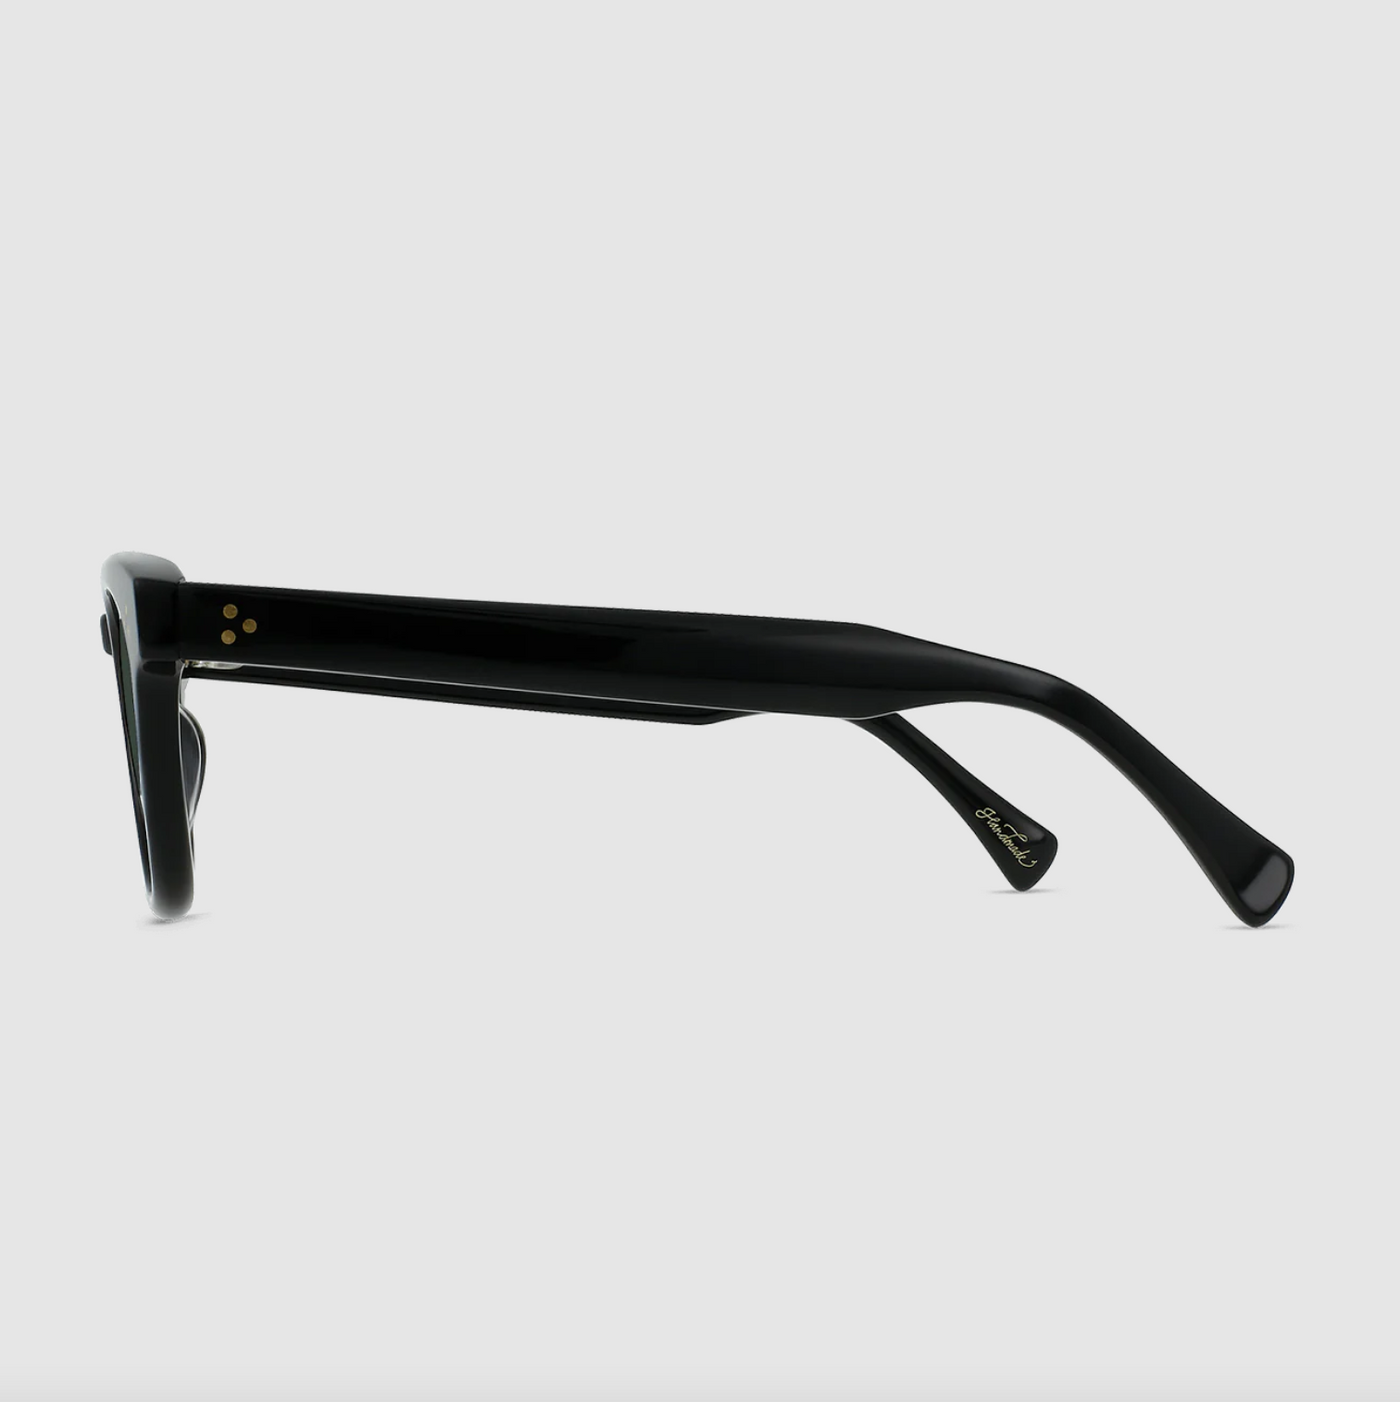 Raen - Squire 49 Sunglasses - Recycled Black / Green Polarized